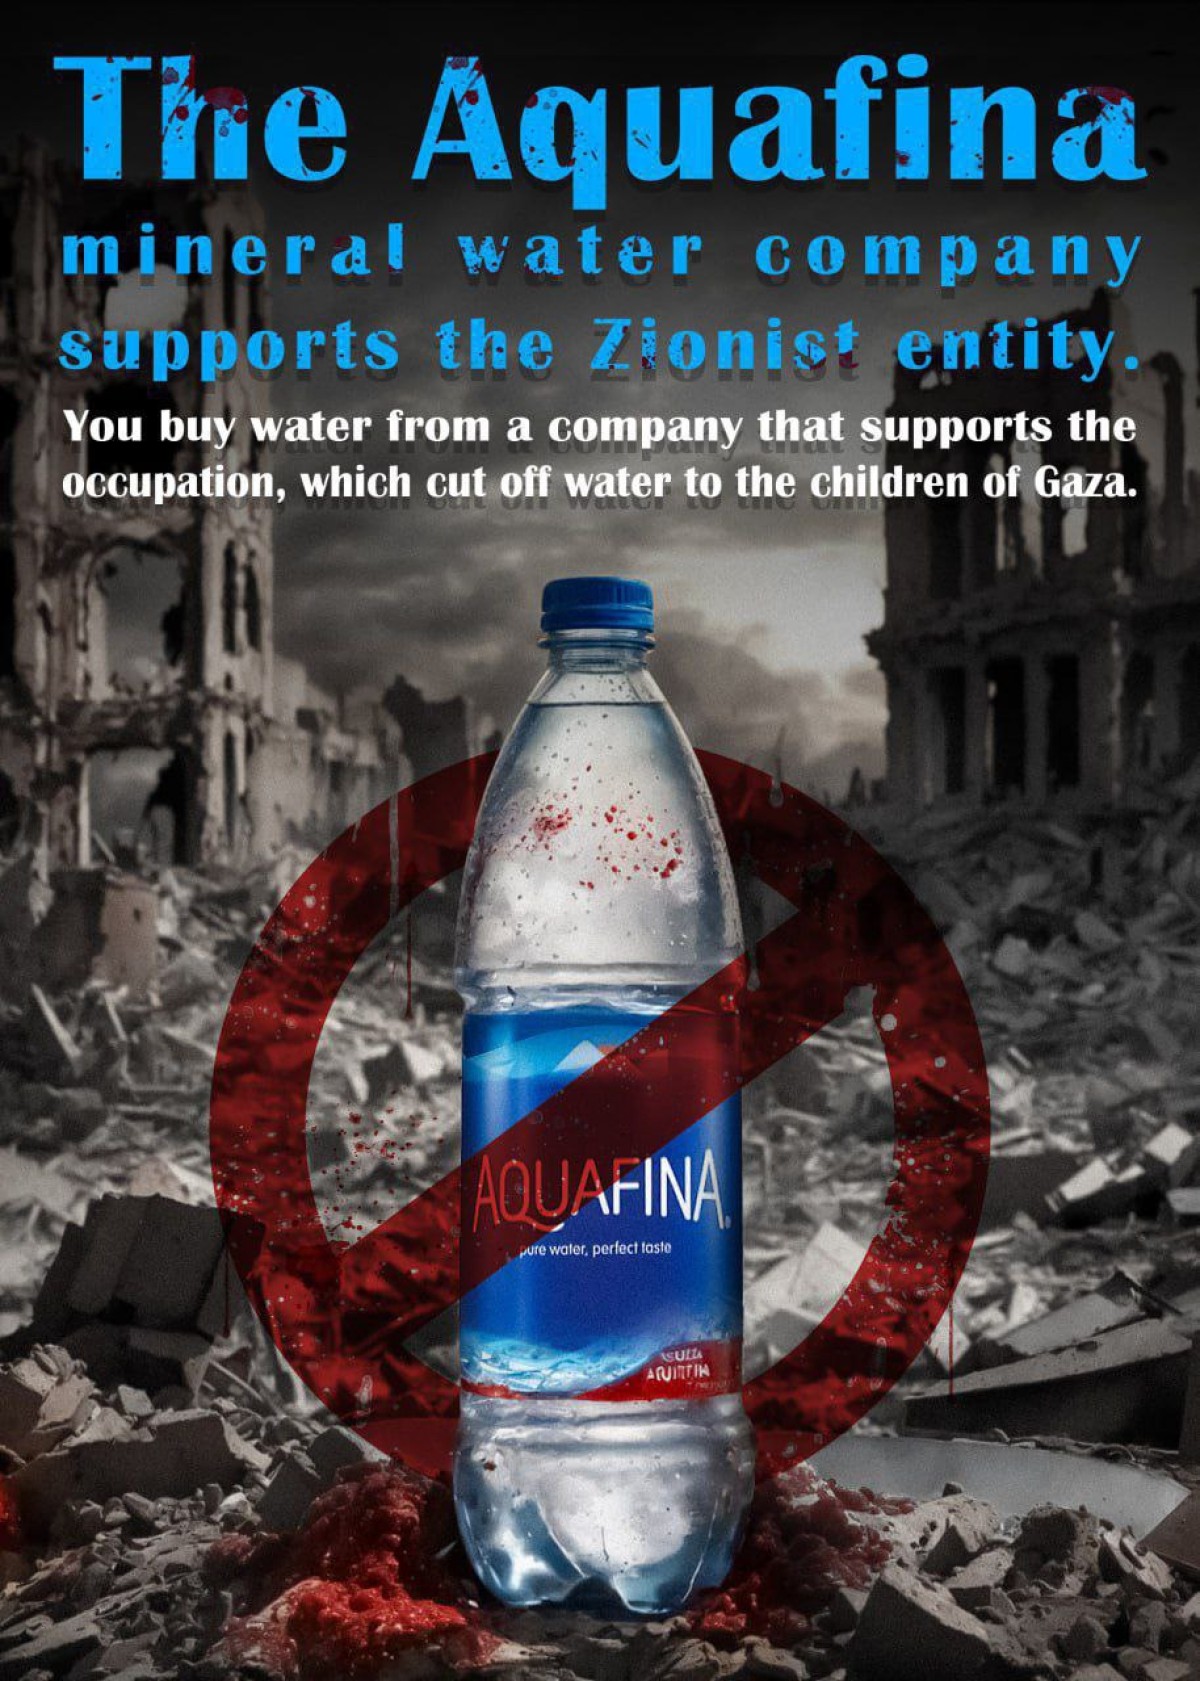 The Aquafina mineral water company supports the Zionist entity.